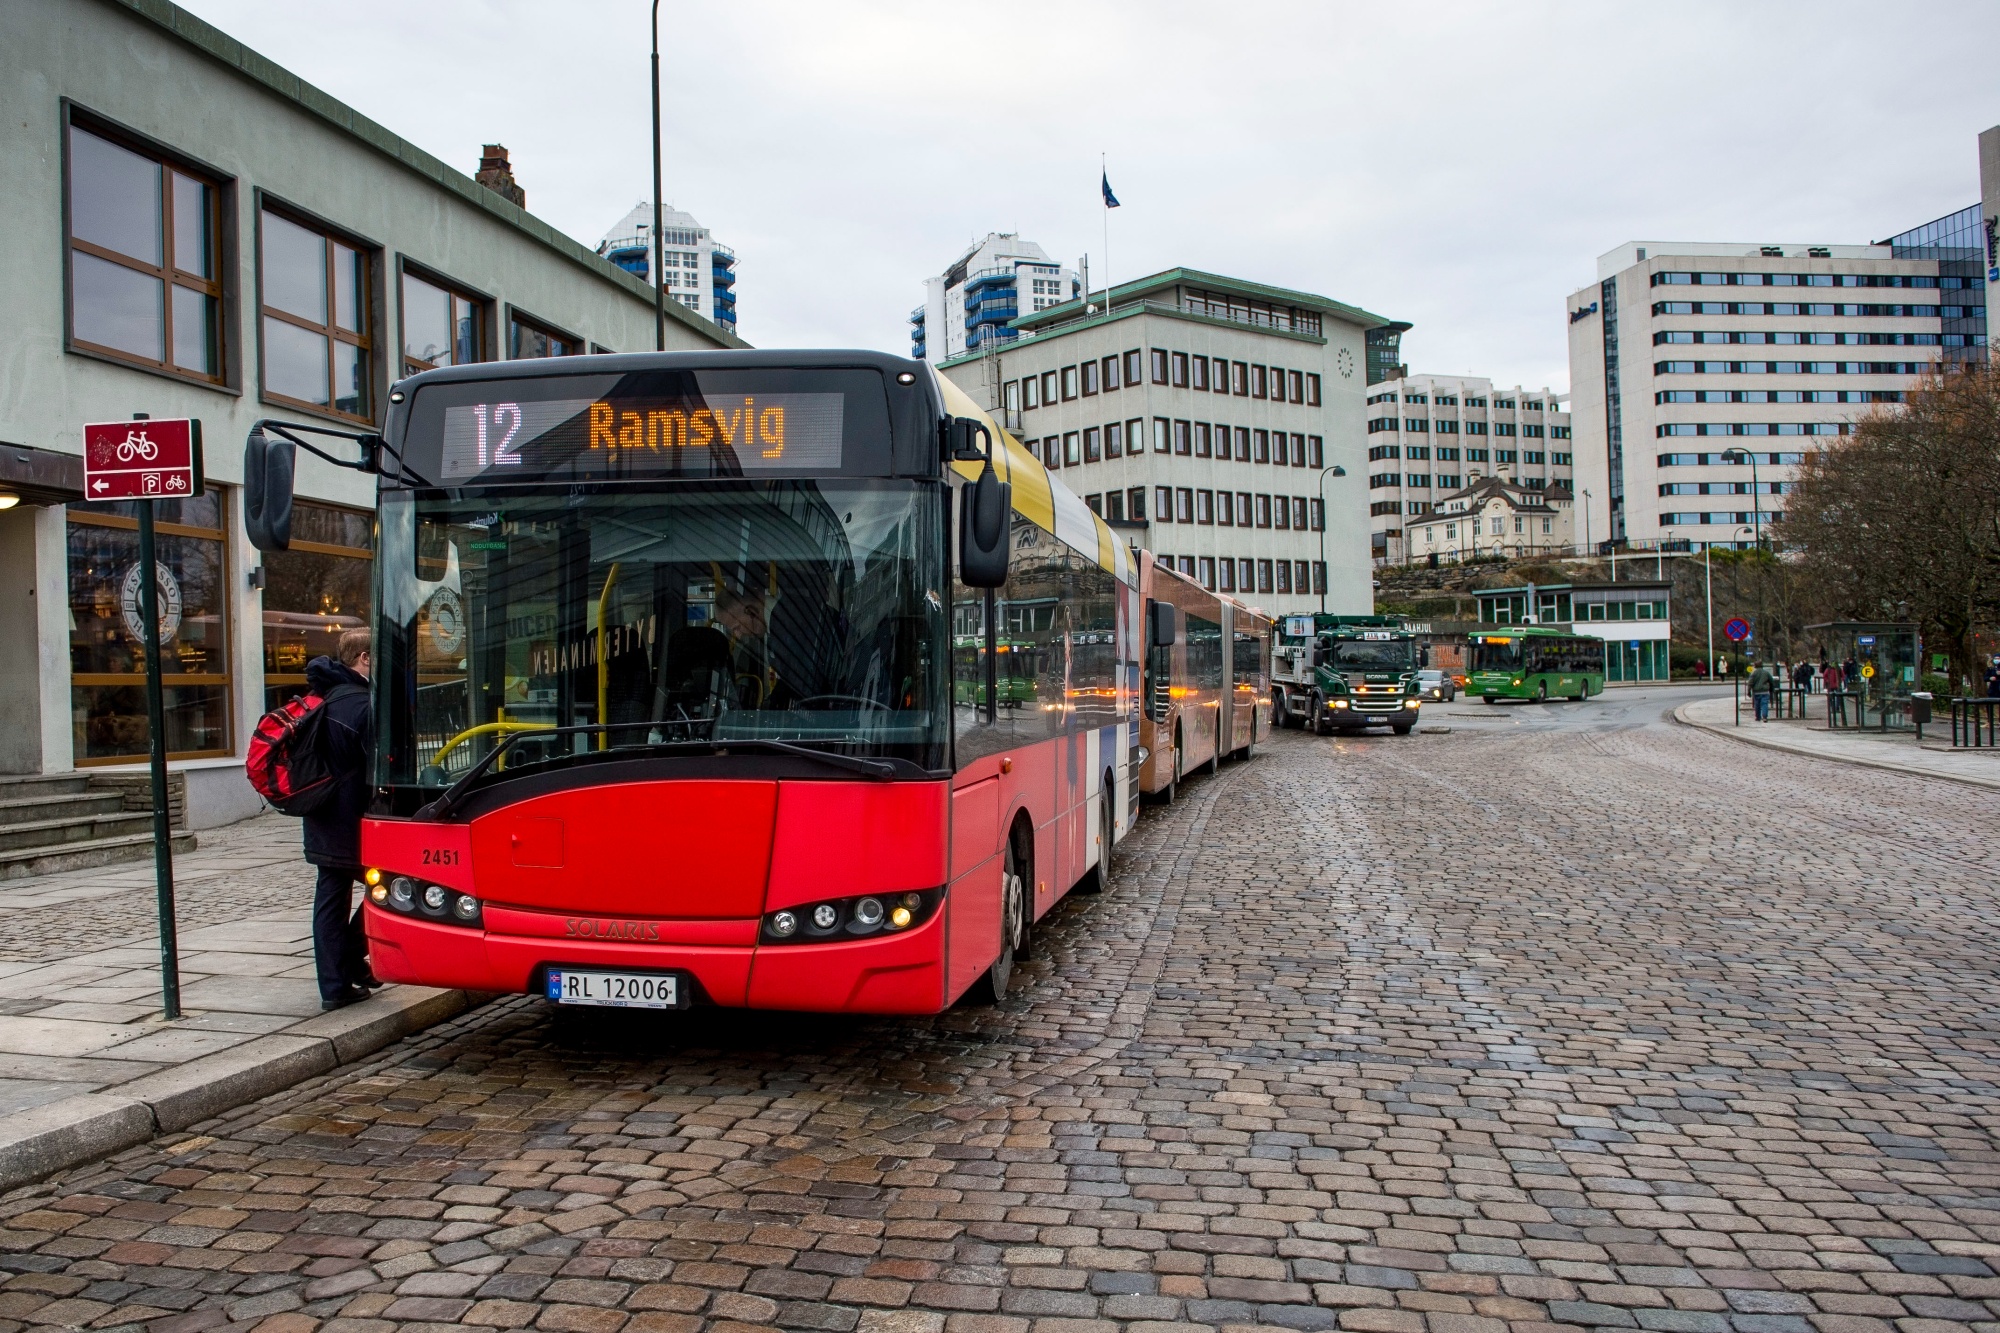 Stavanger, Norway Offers Free Bus, Train, Ferry Transport - Bloomberg